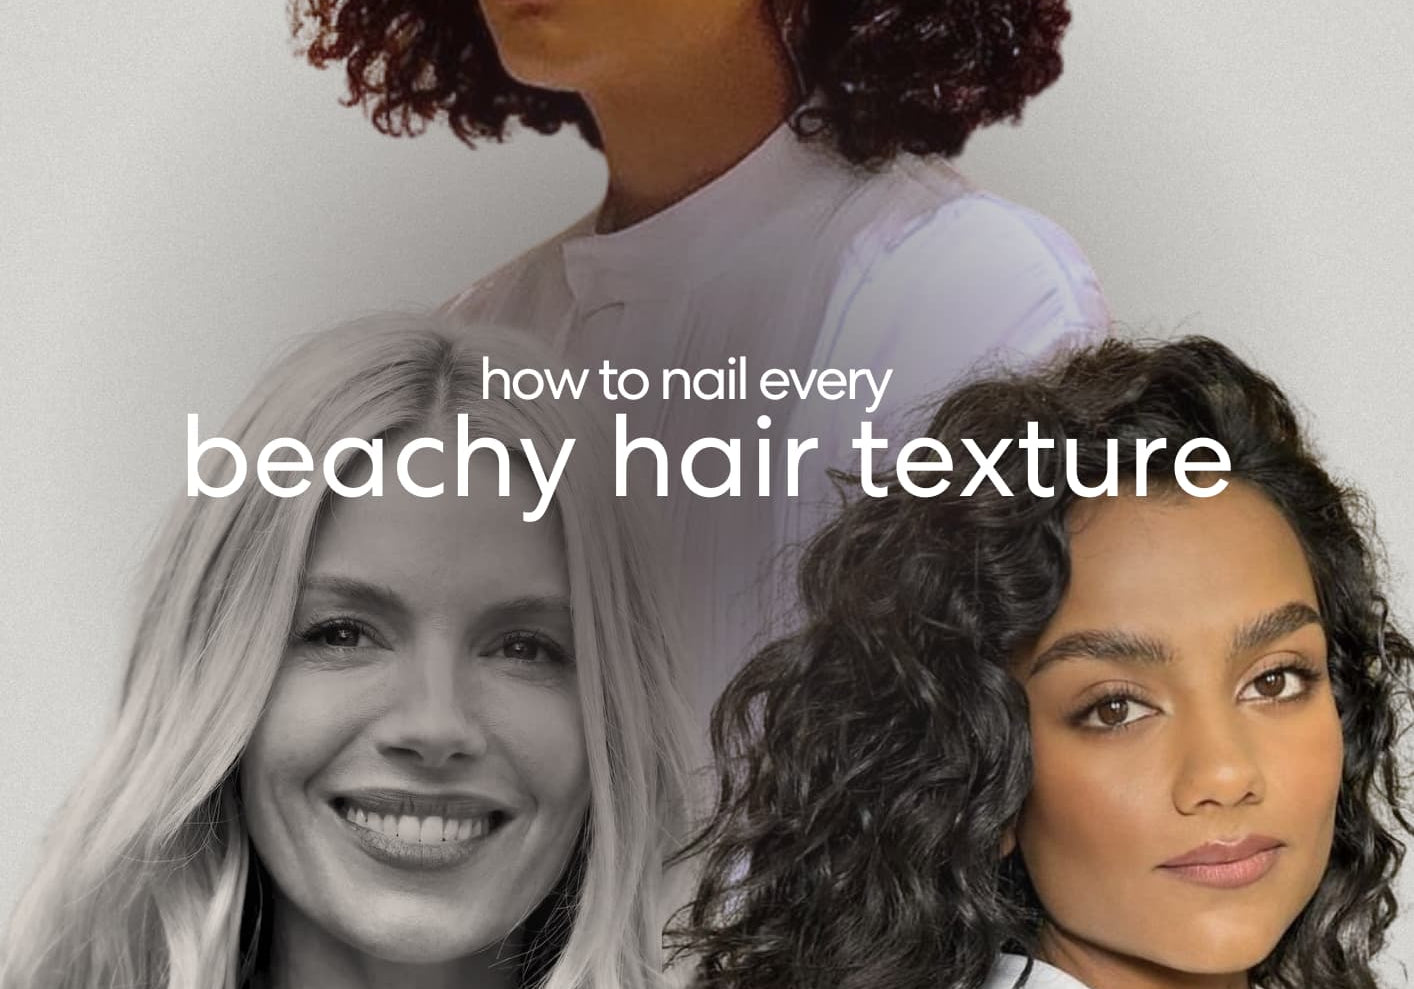 How to nail every kind of beachy texture